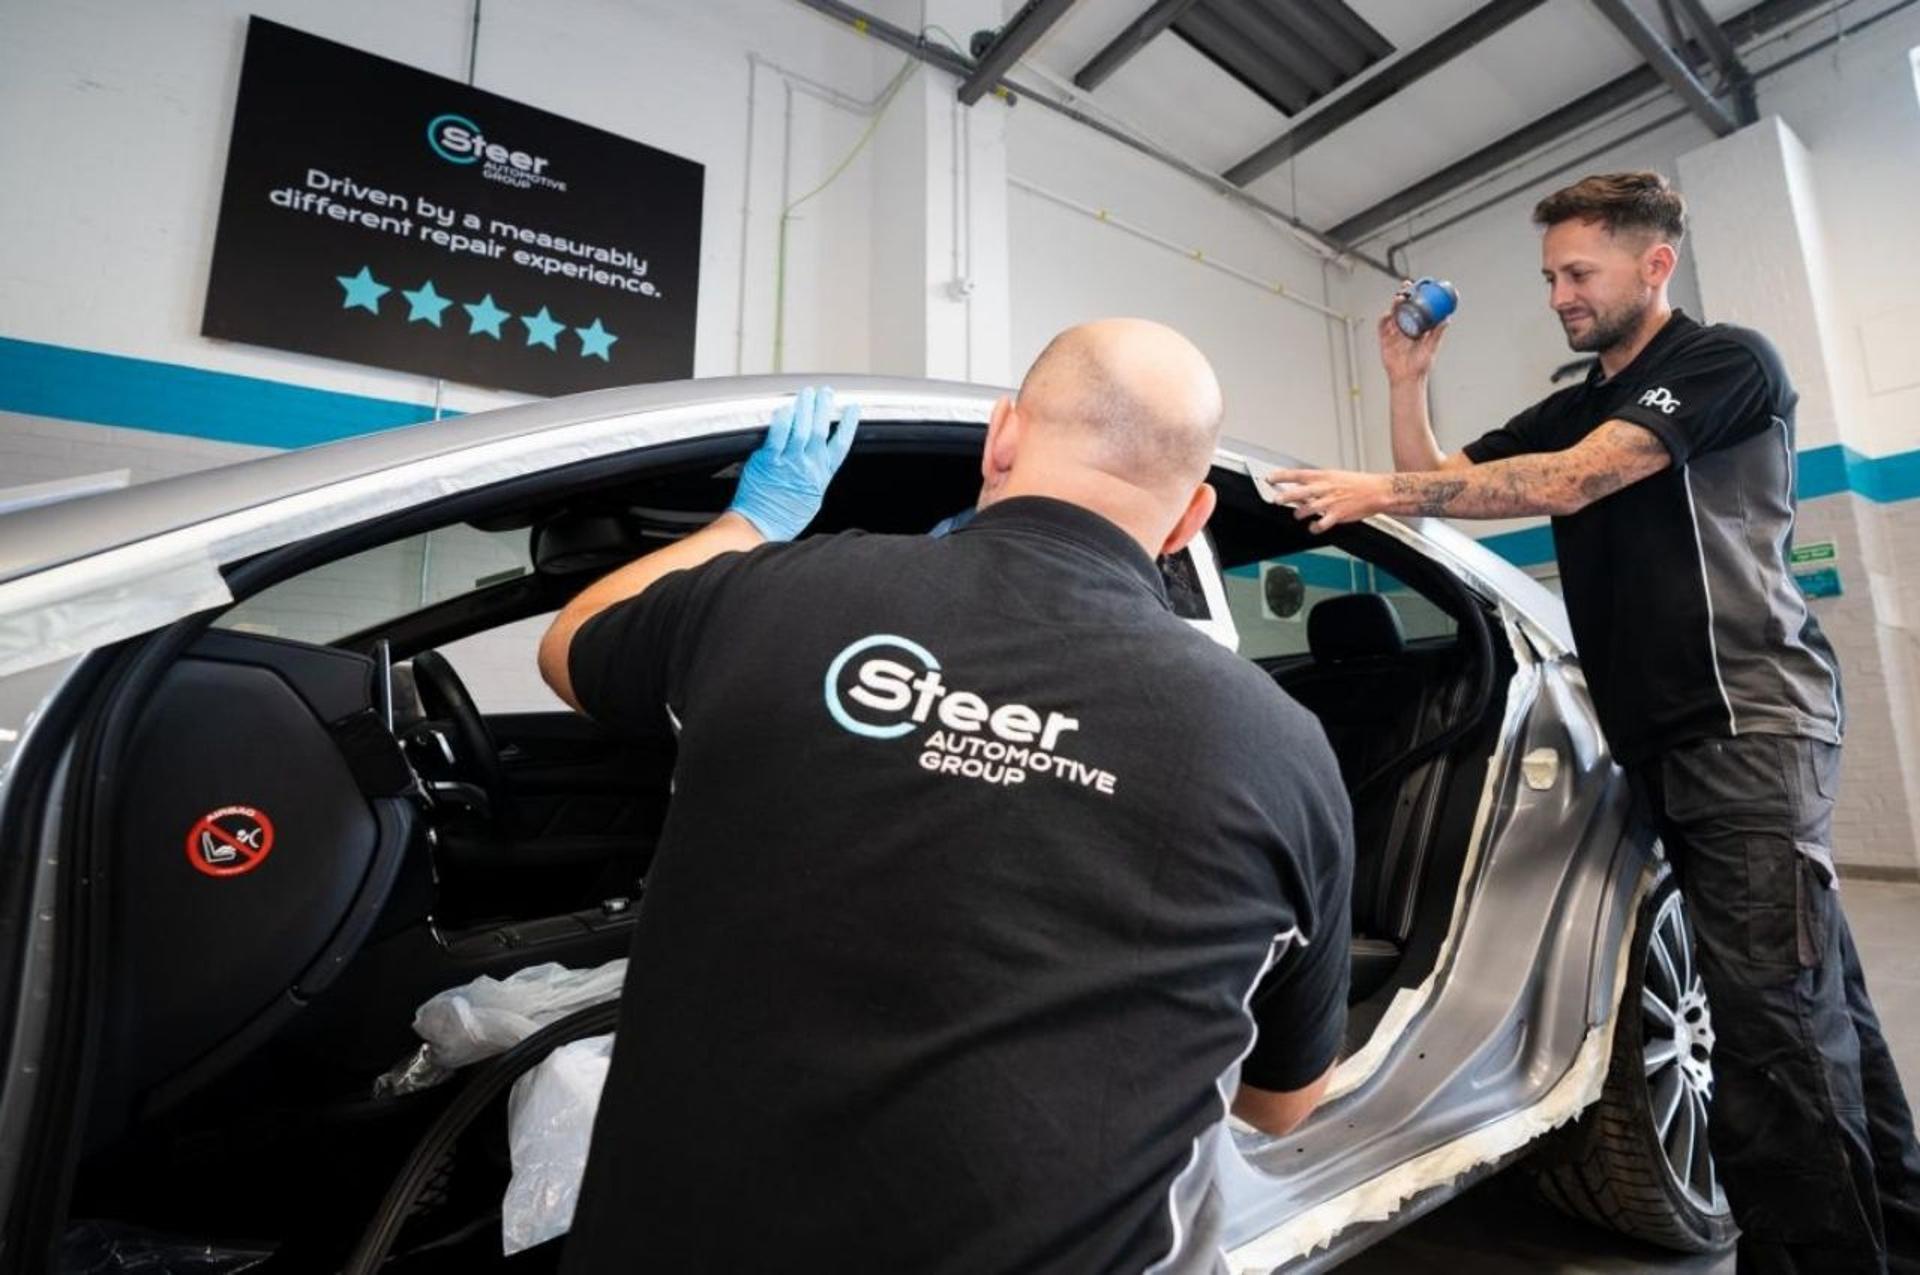 Collision repair group targets more M&A after Oakley Capital investment